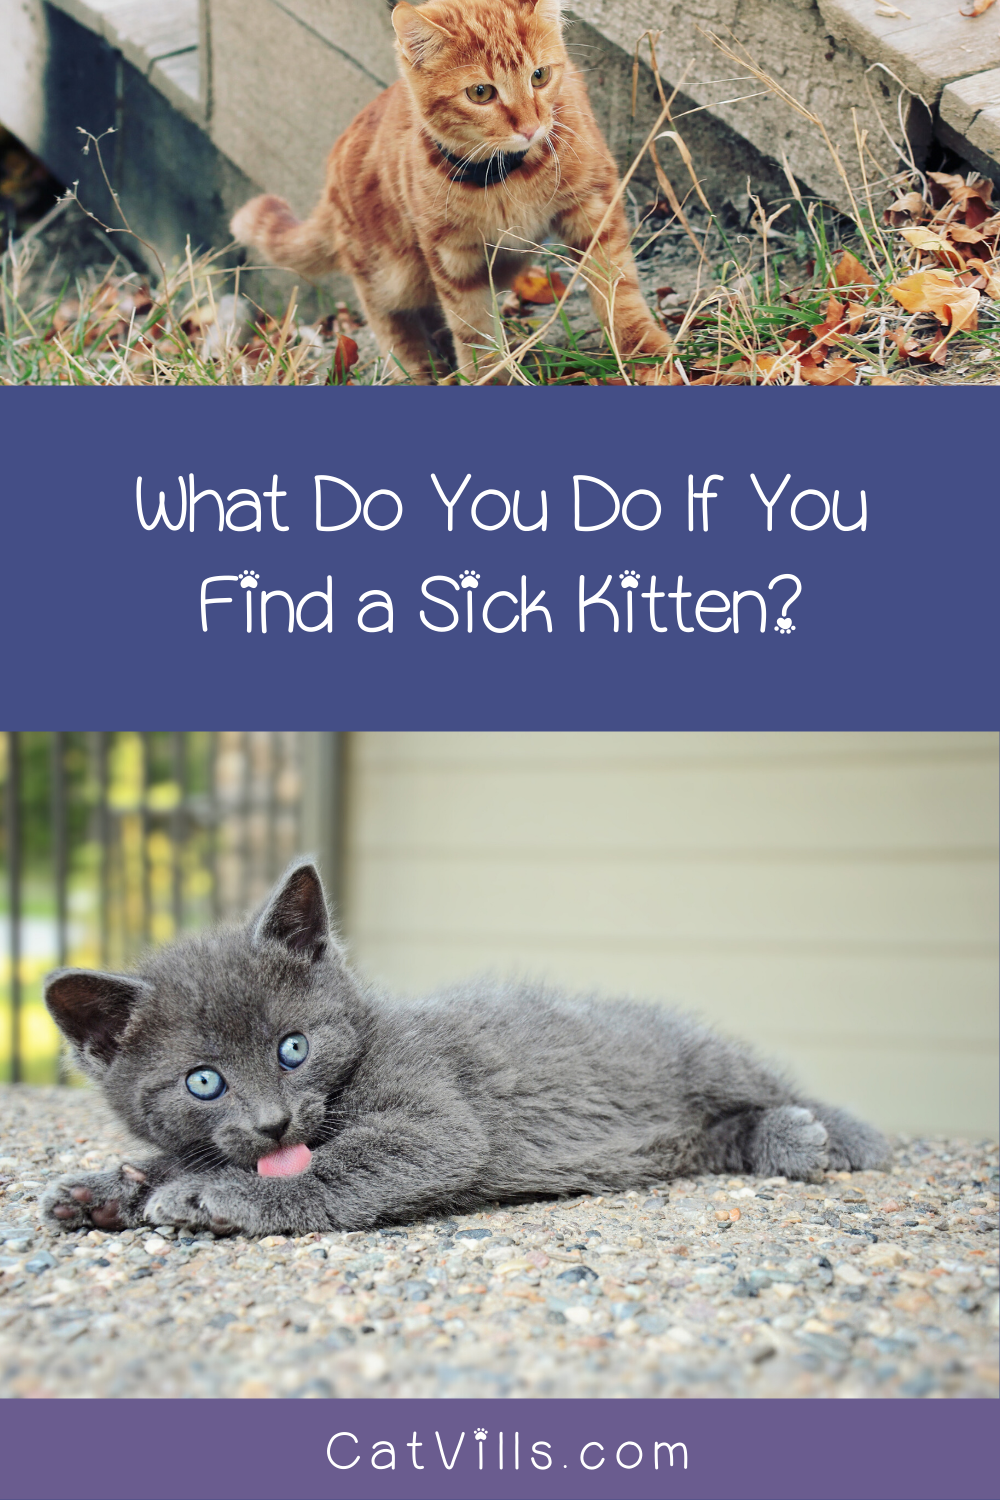 What Do You Do if You Find a Sick Kitten?